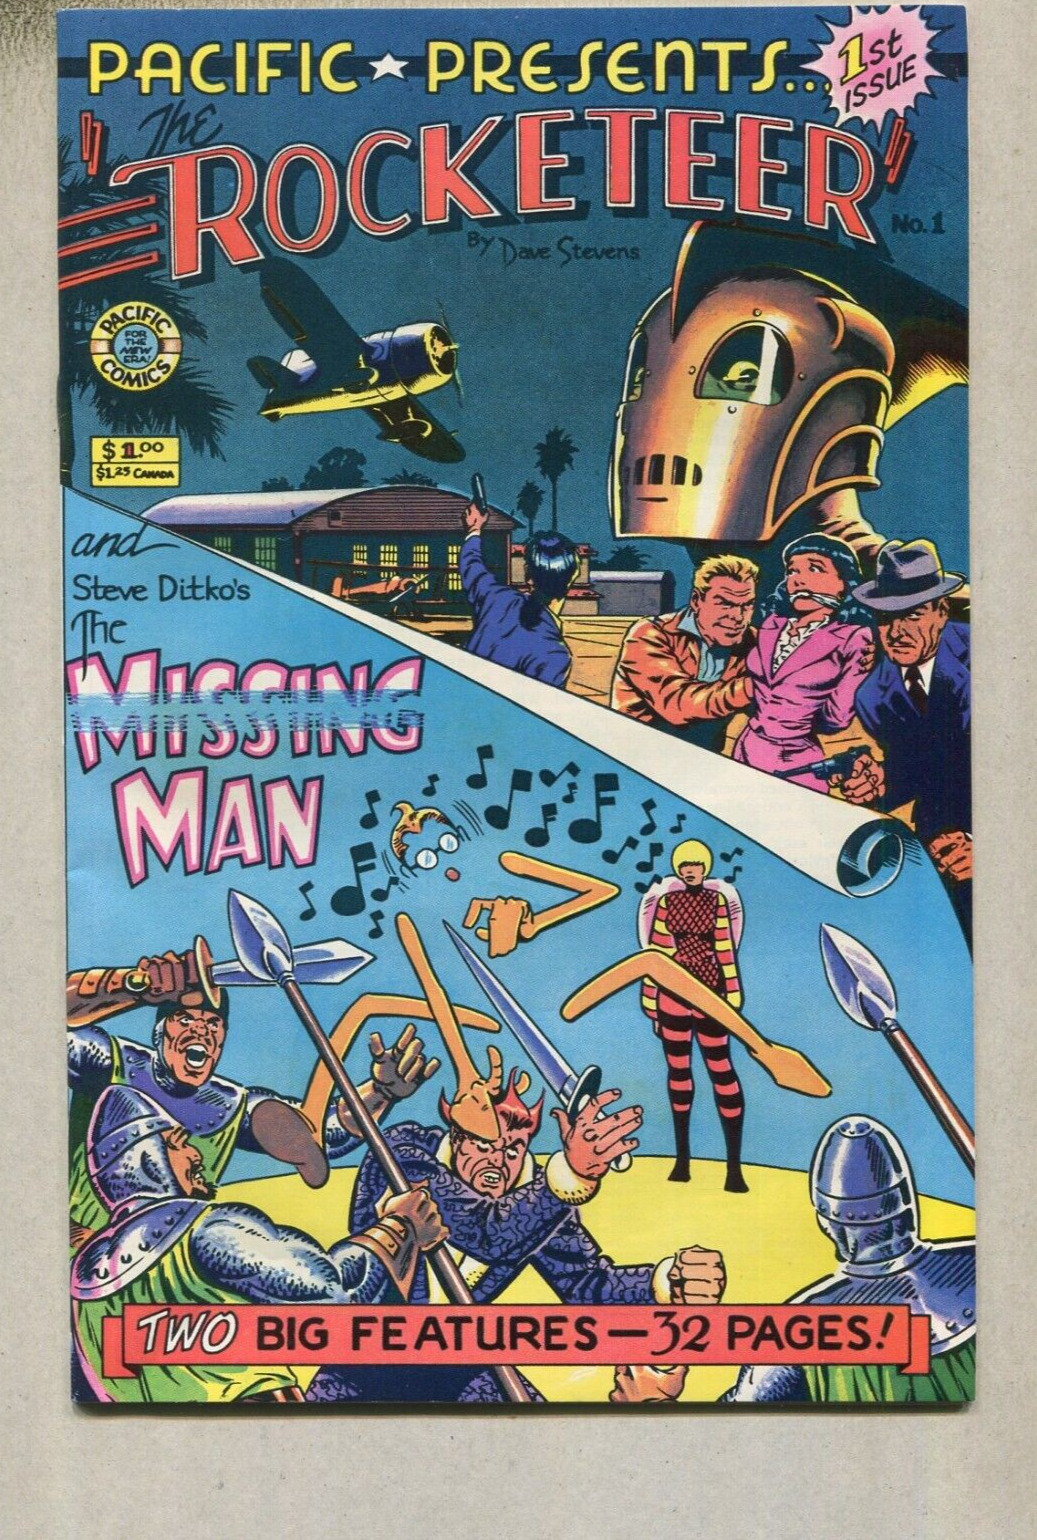 Pacific Presents: Rocketeer 1st Issue NM Missing Man  CBX 1L